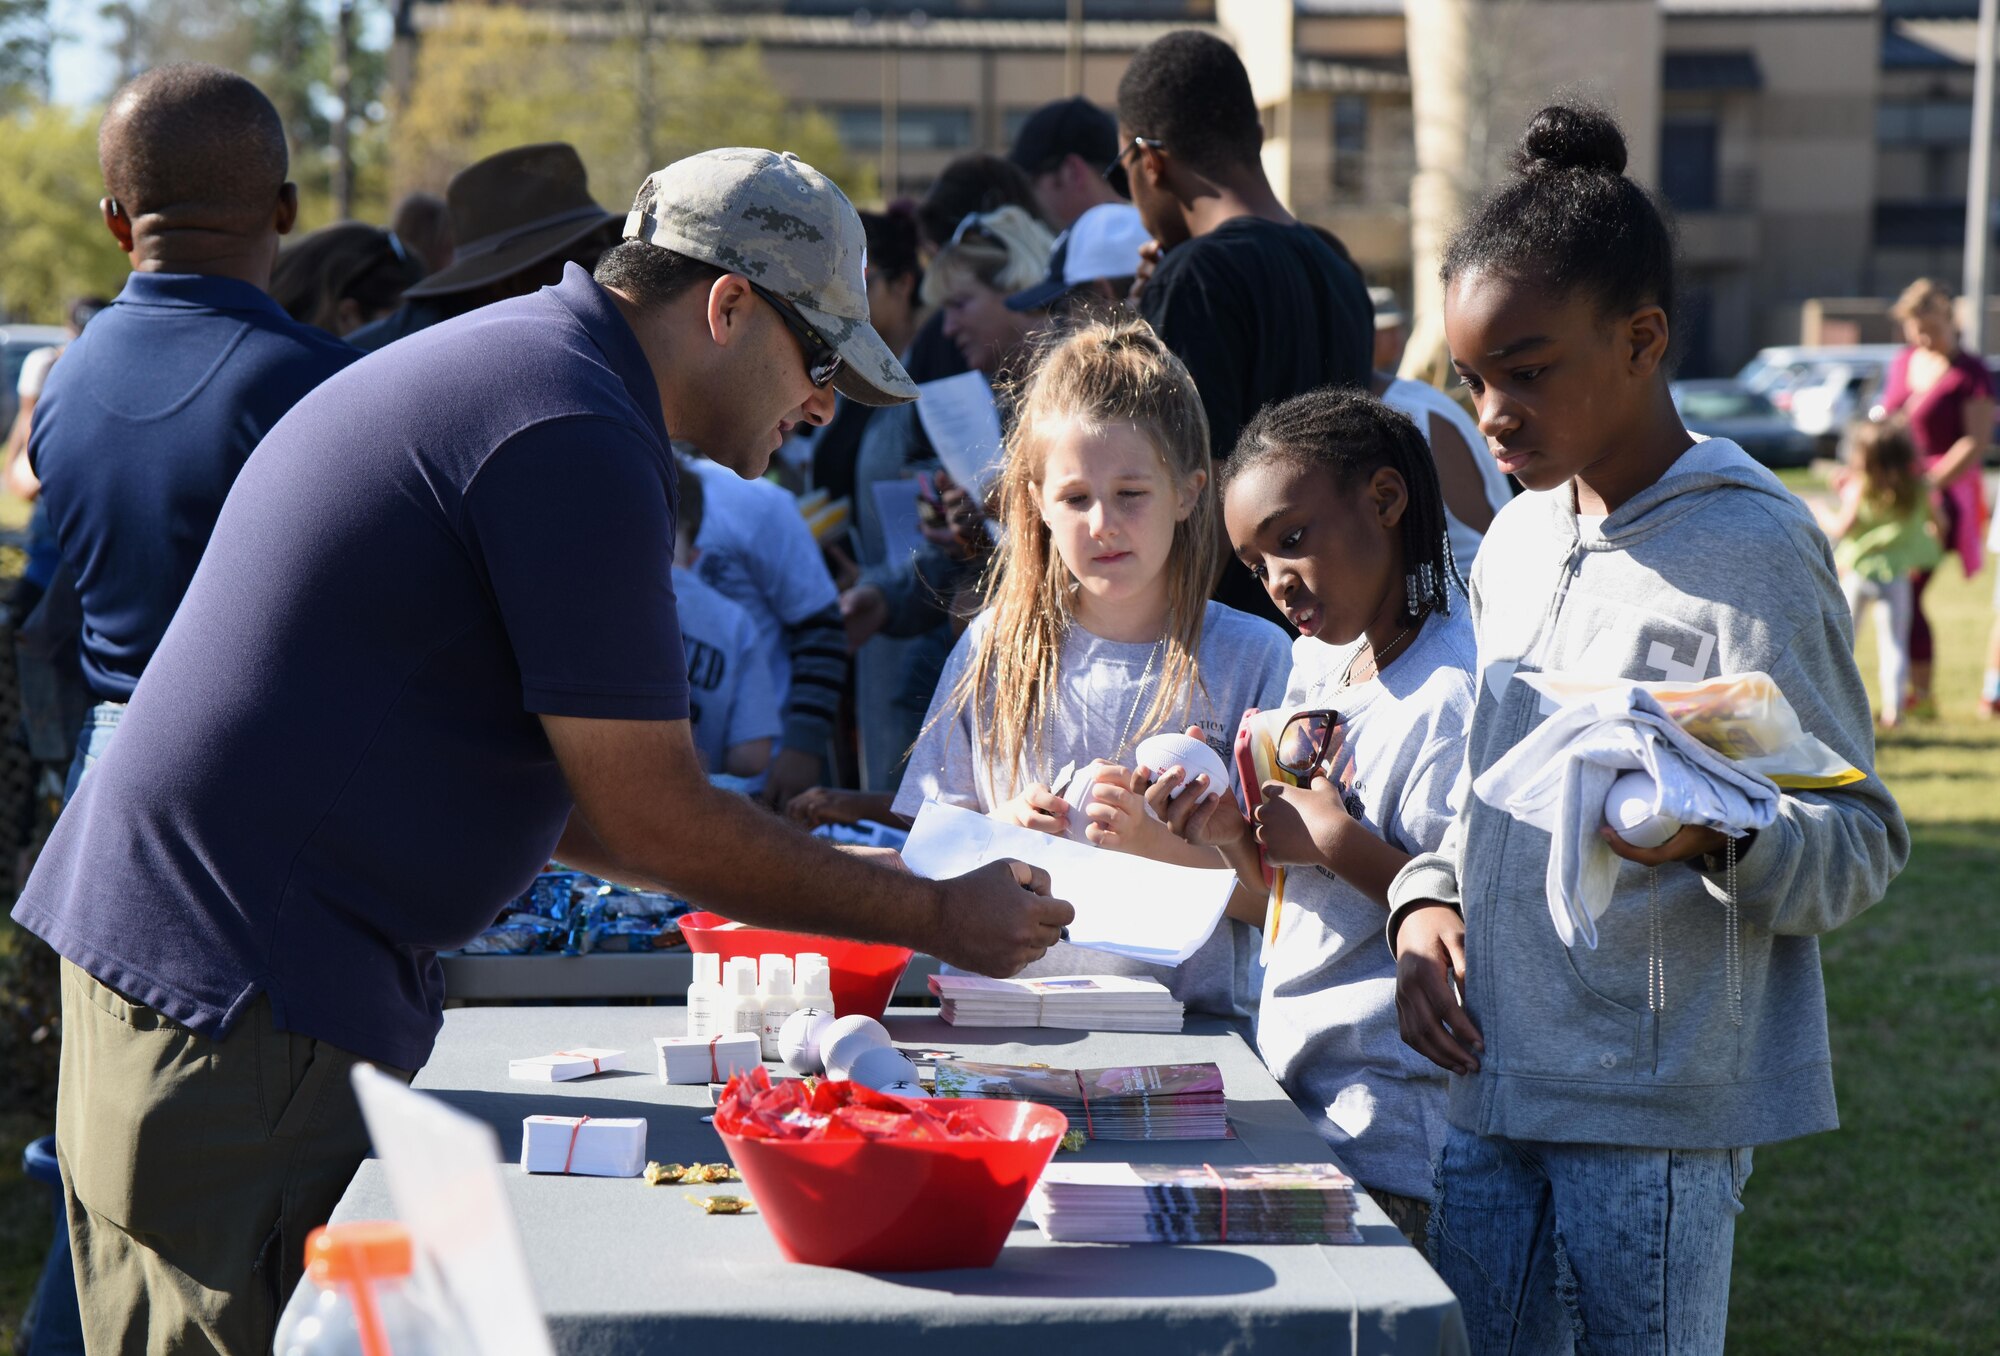 Keesler children process through a deployment line during Operation Hero March 18, 2017, on Keesler Air Force Base, Miss. The activities at the event were designed to help children better understand what their parents do when they deploy. (U.S. Air Force photo by Kemberly Groue)